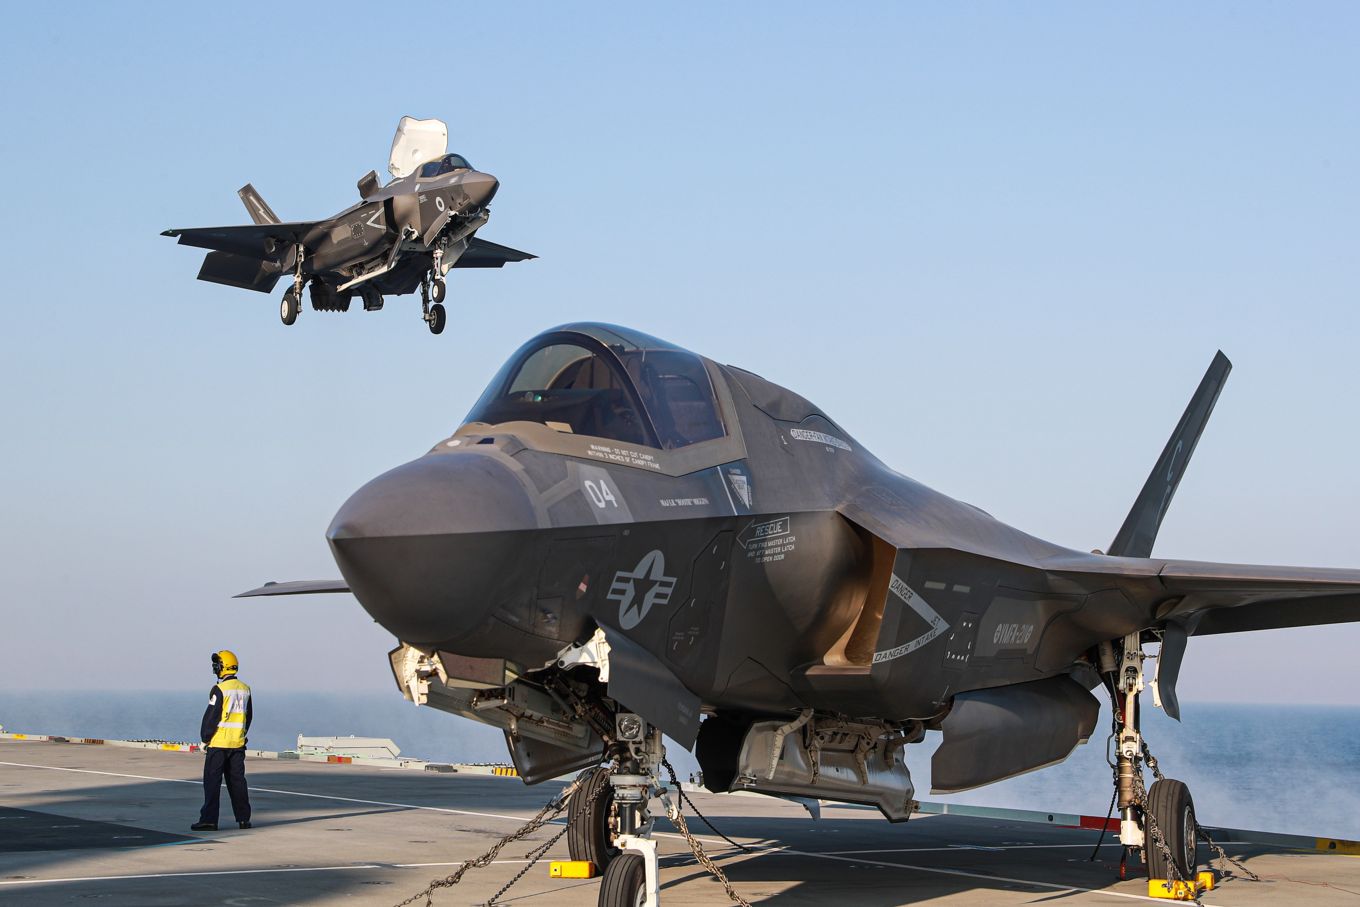 Image shows F35 aircraft on HMS Queen Elizabeth aircraft carrier.